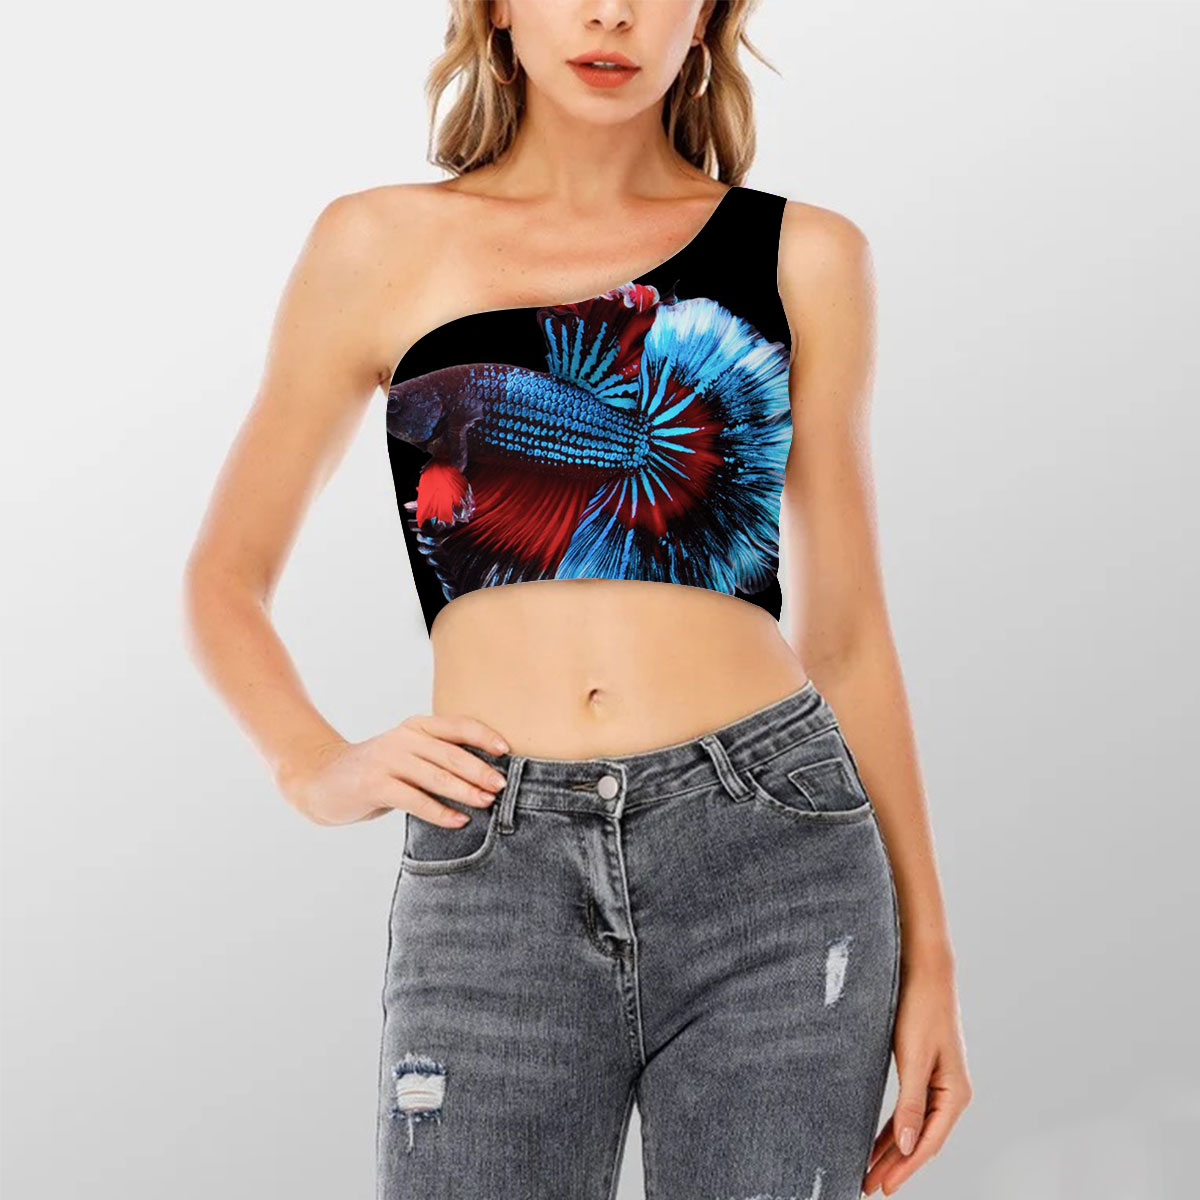 Glowing Betta Fish Shoulder Cropped Top